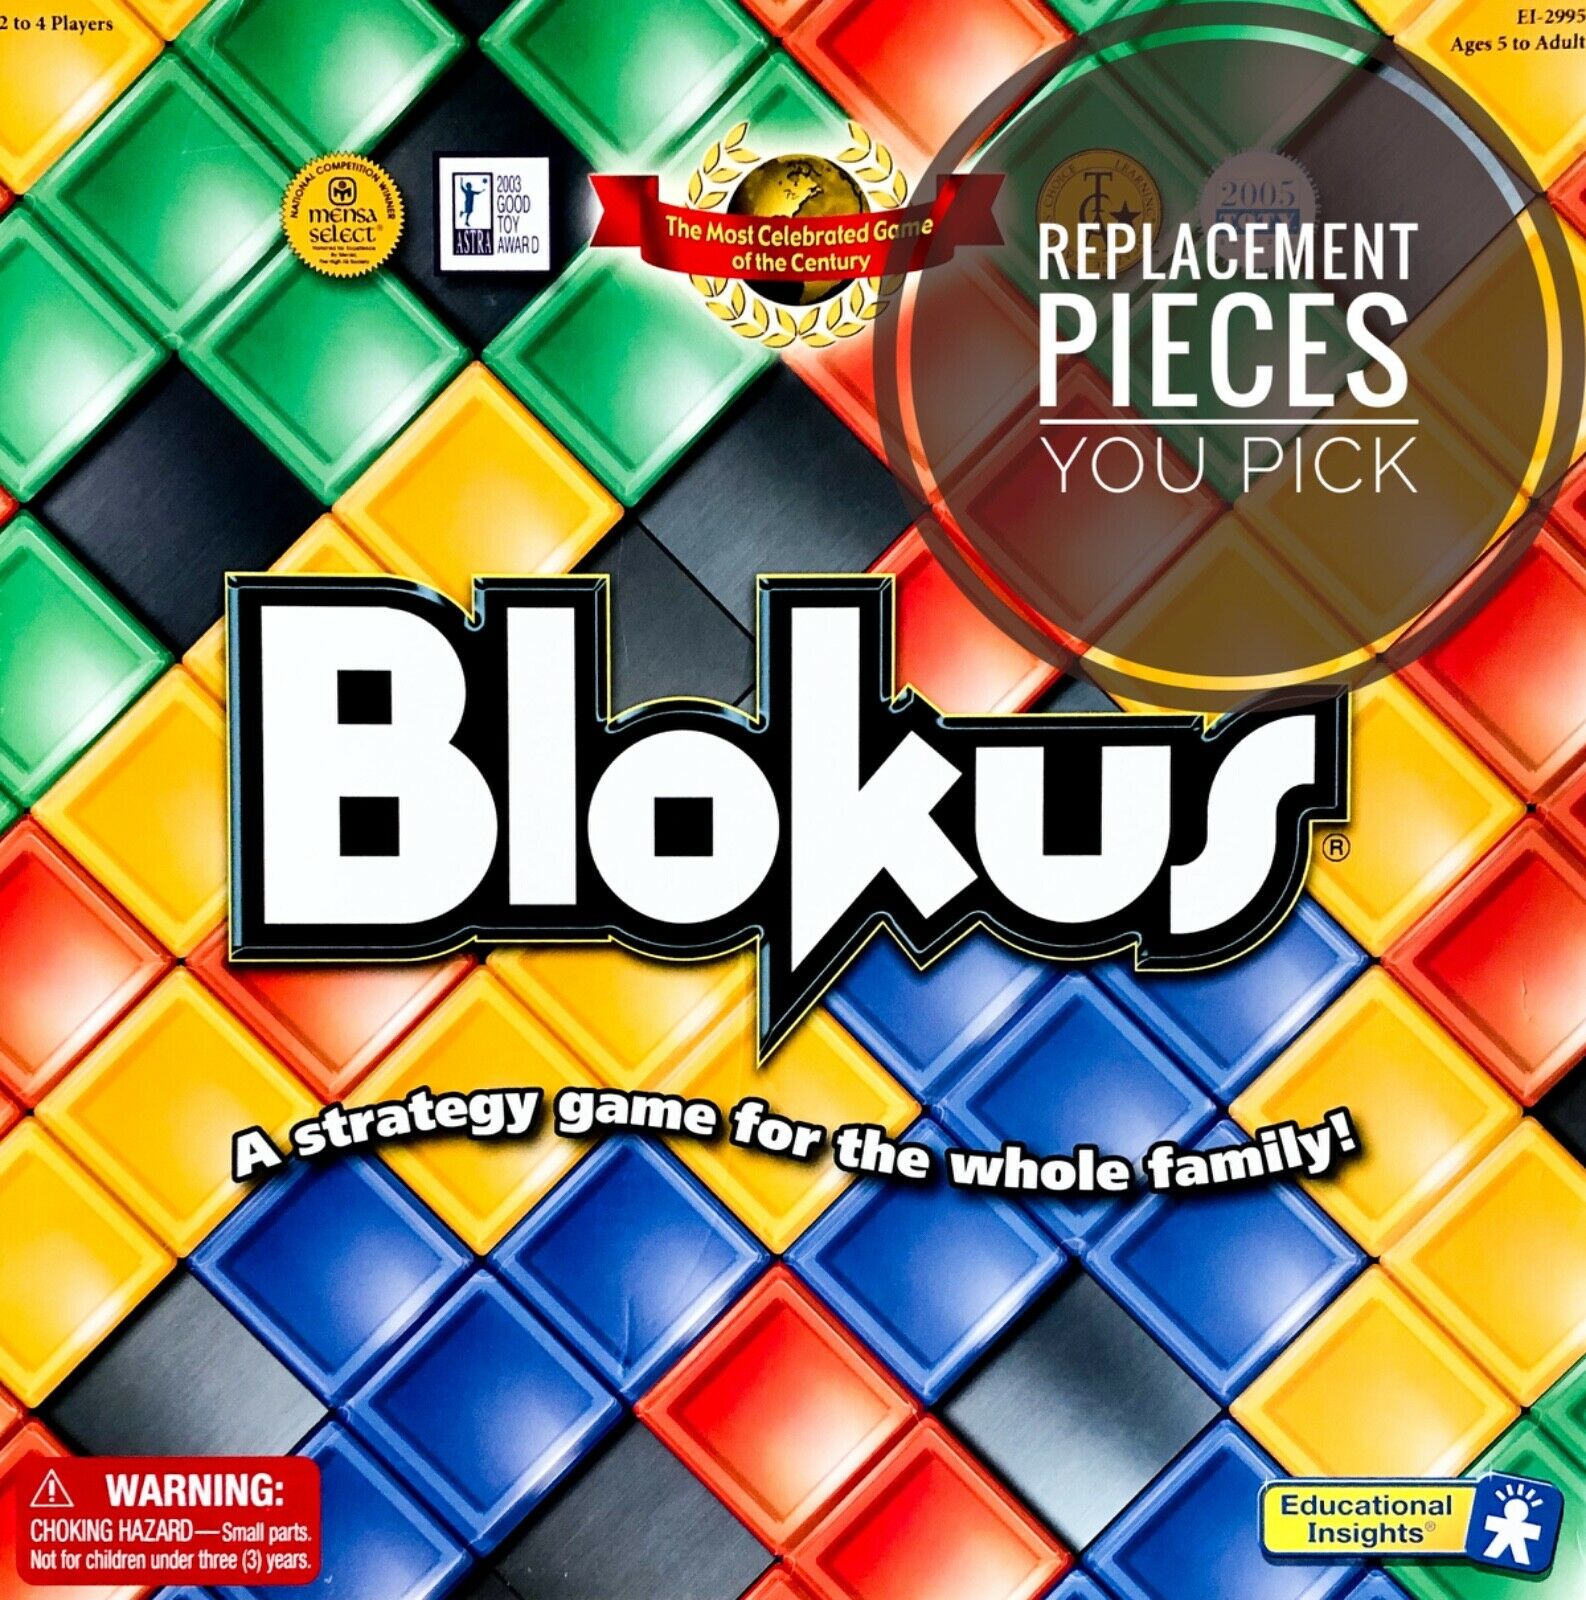 Blokus Game Individual Replacement Pieces Compatible W 2005 2008 & 2009 Versions